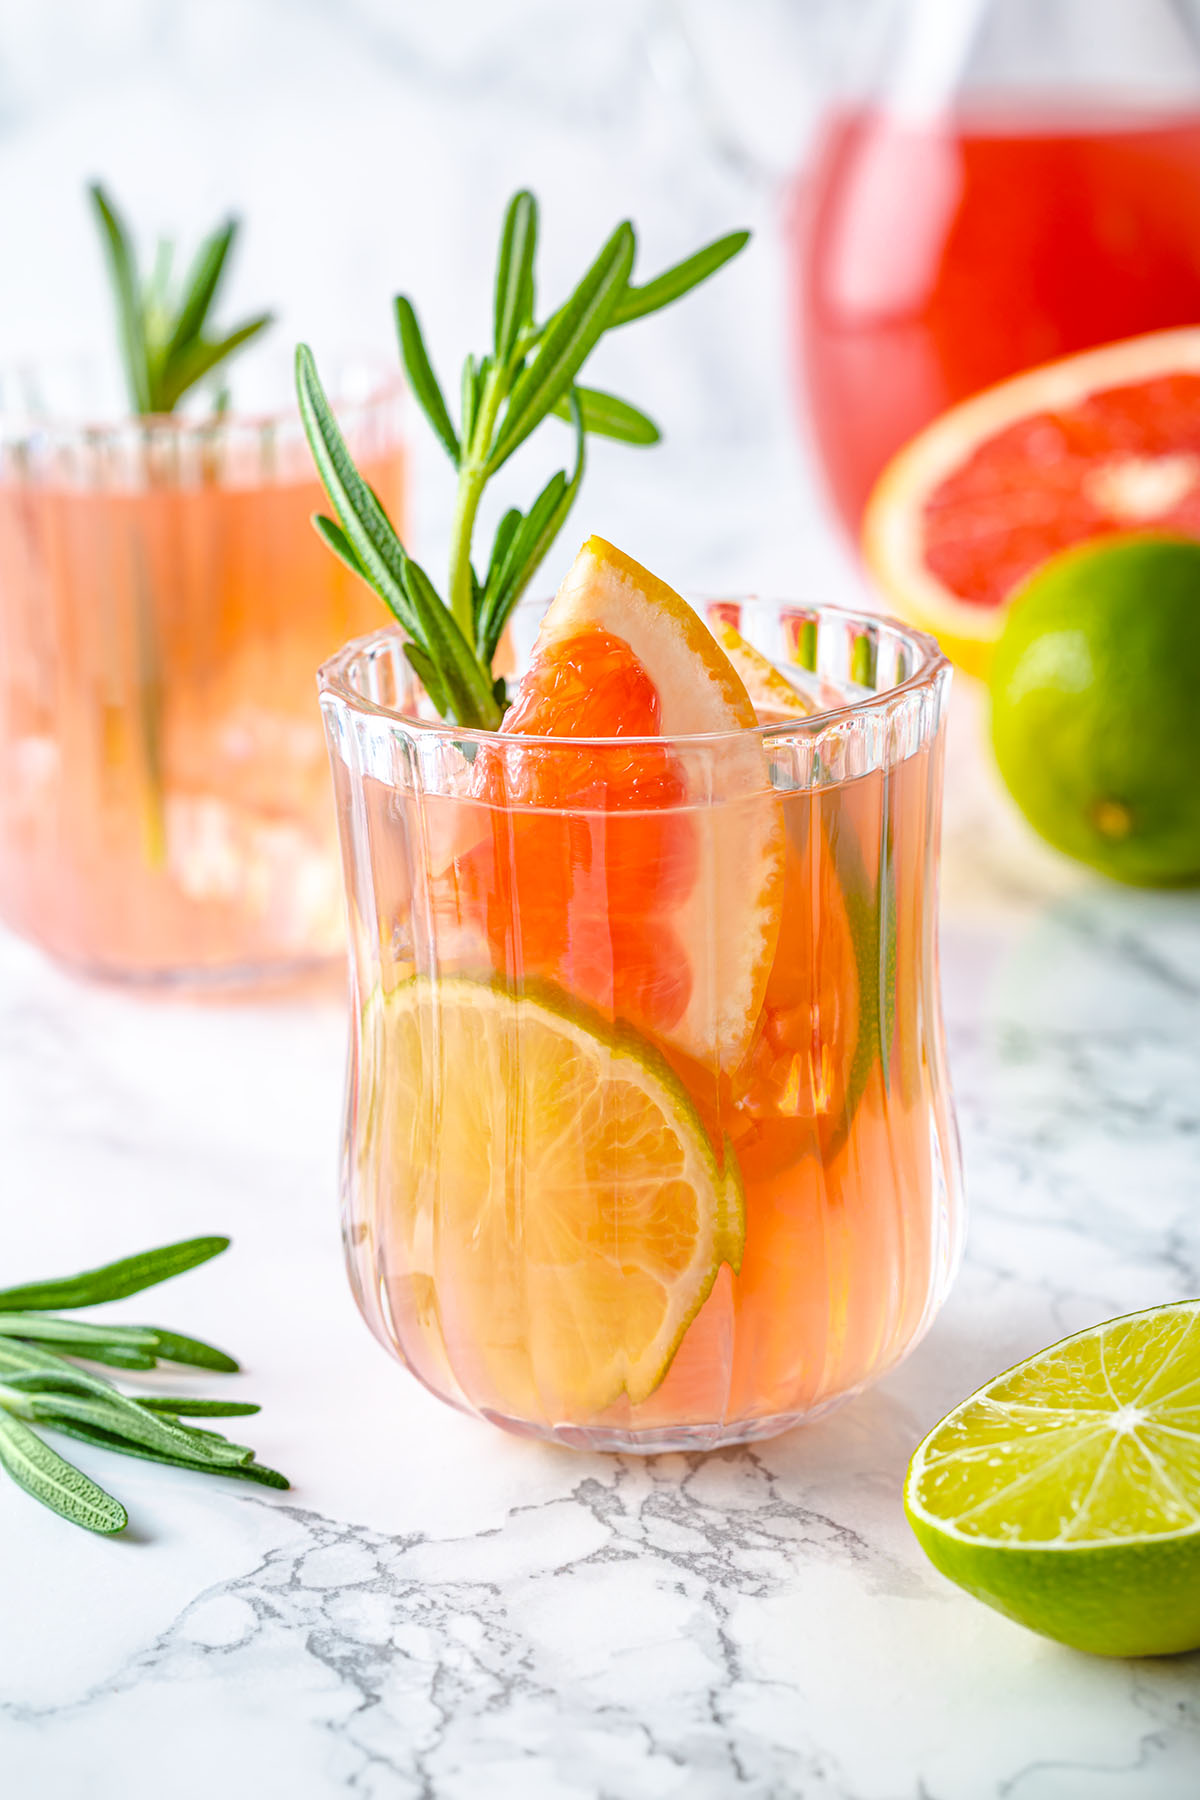 Grapefruit Paloma mocktail in a glass with rosemary sprig